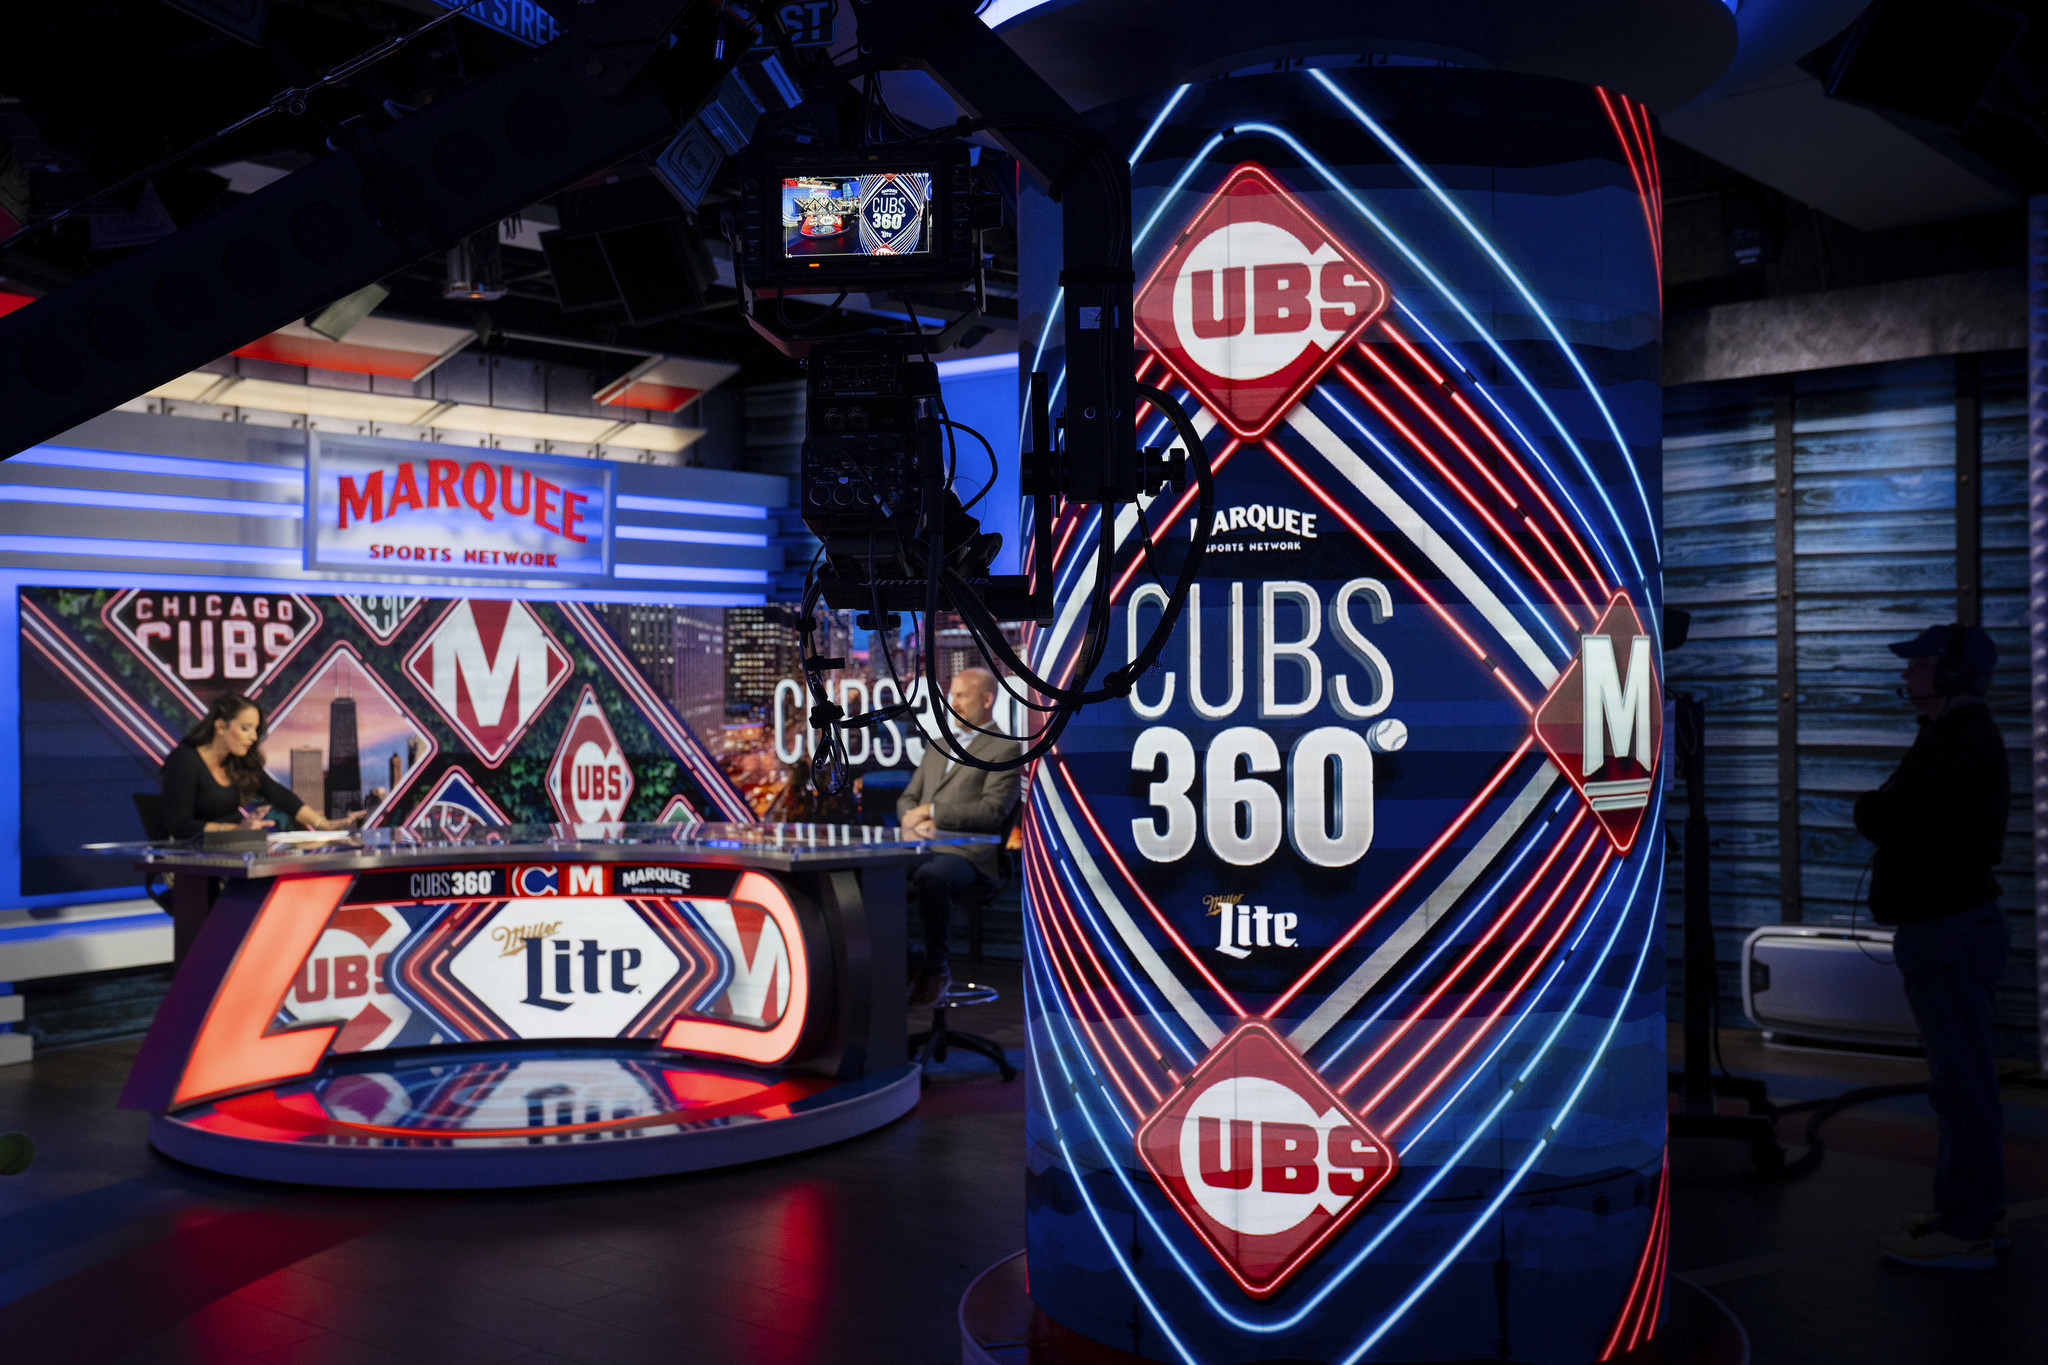 Chicago Cubs Ratings drop for Marquee Sports Network